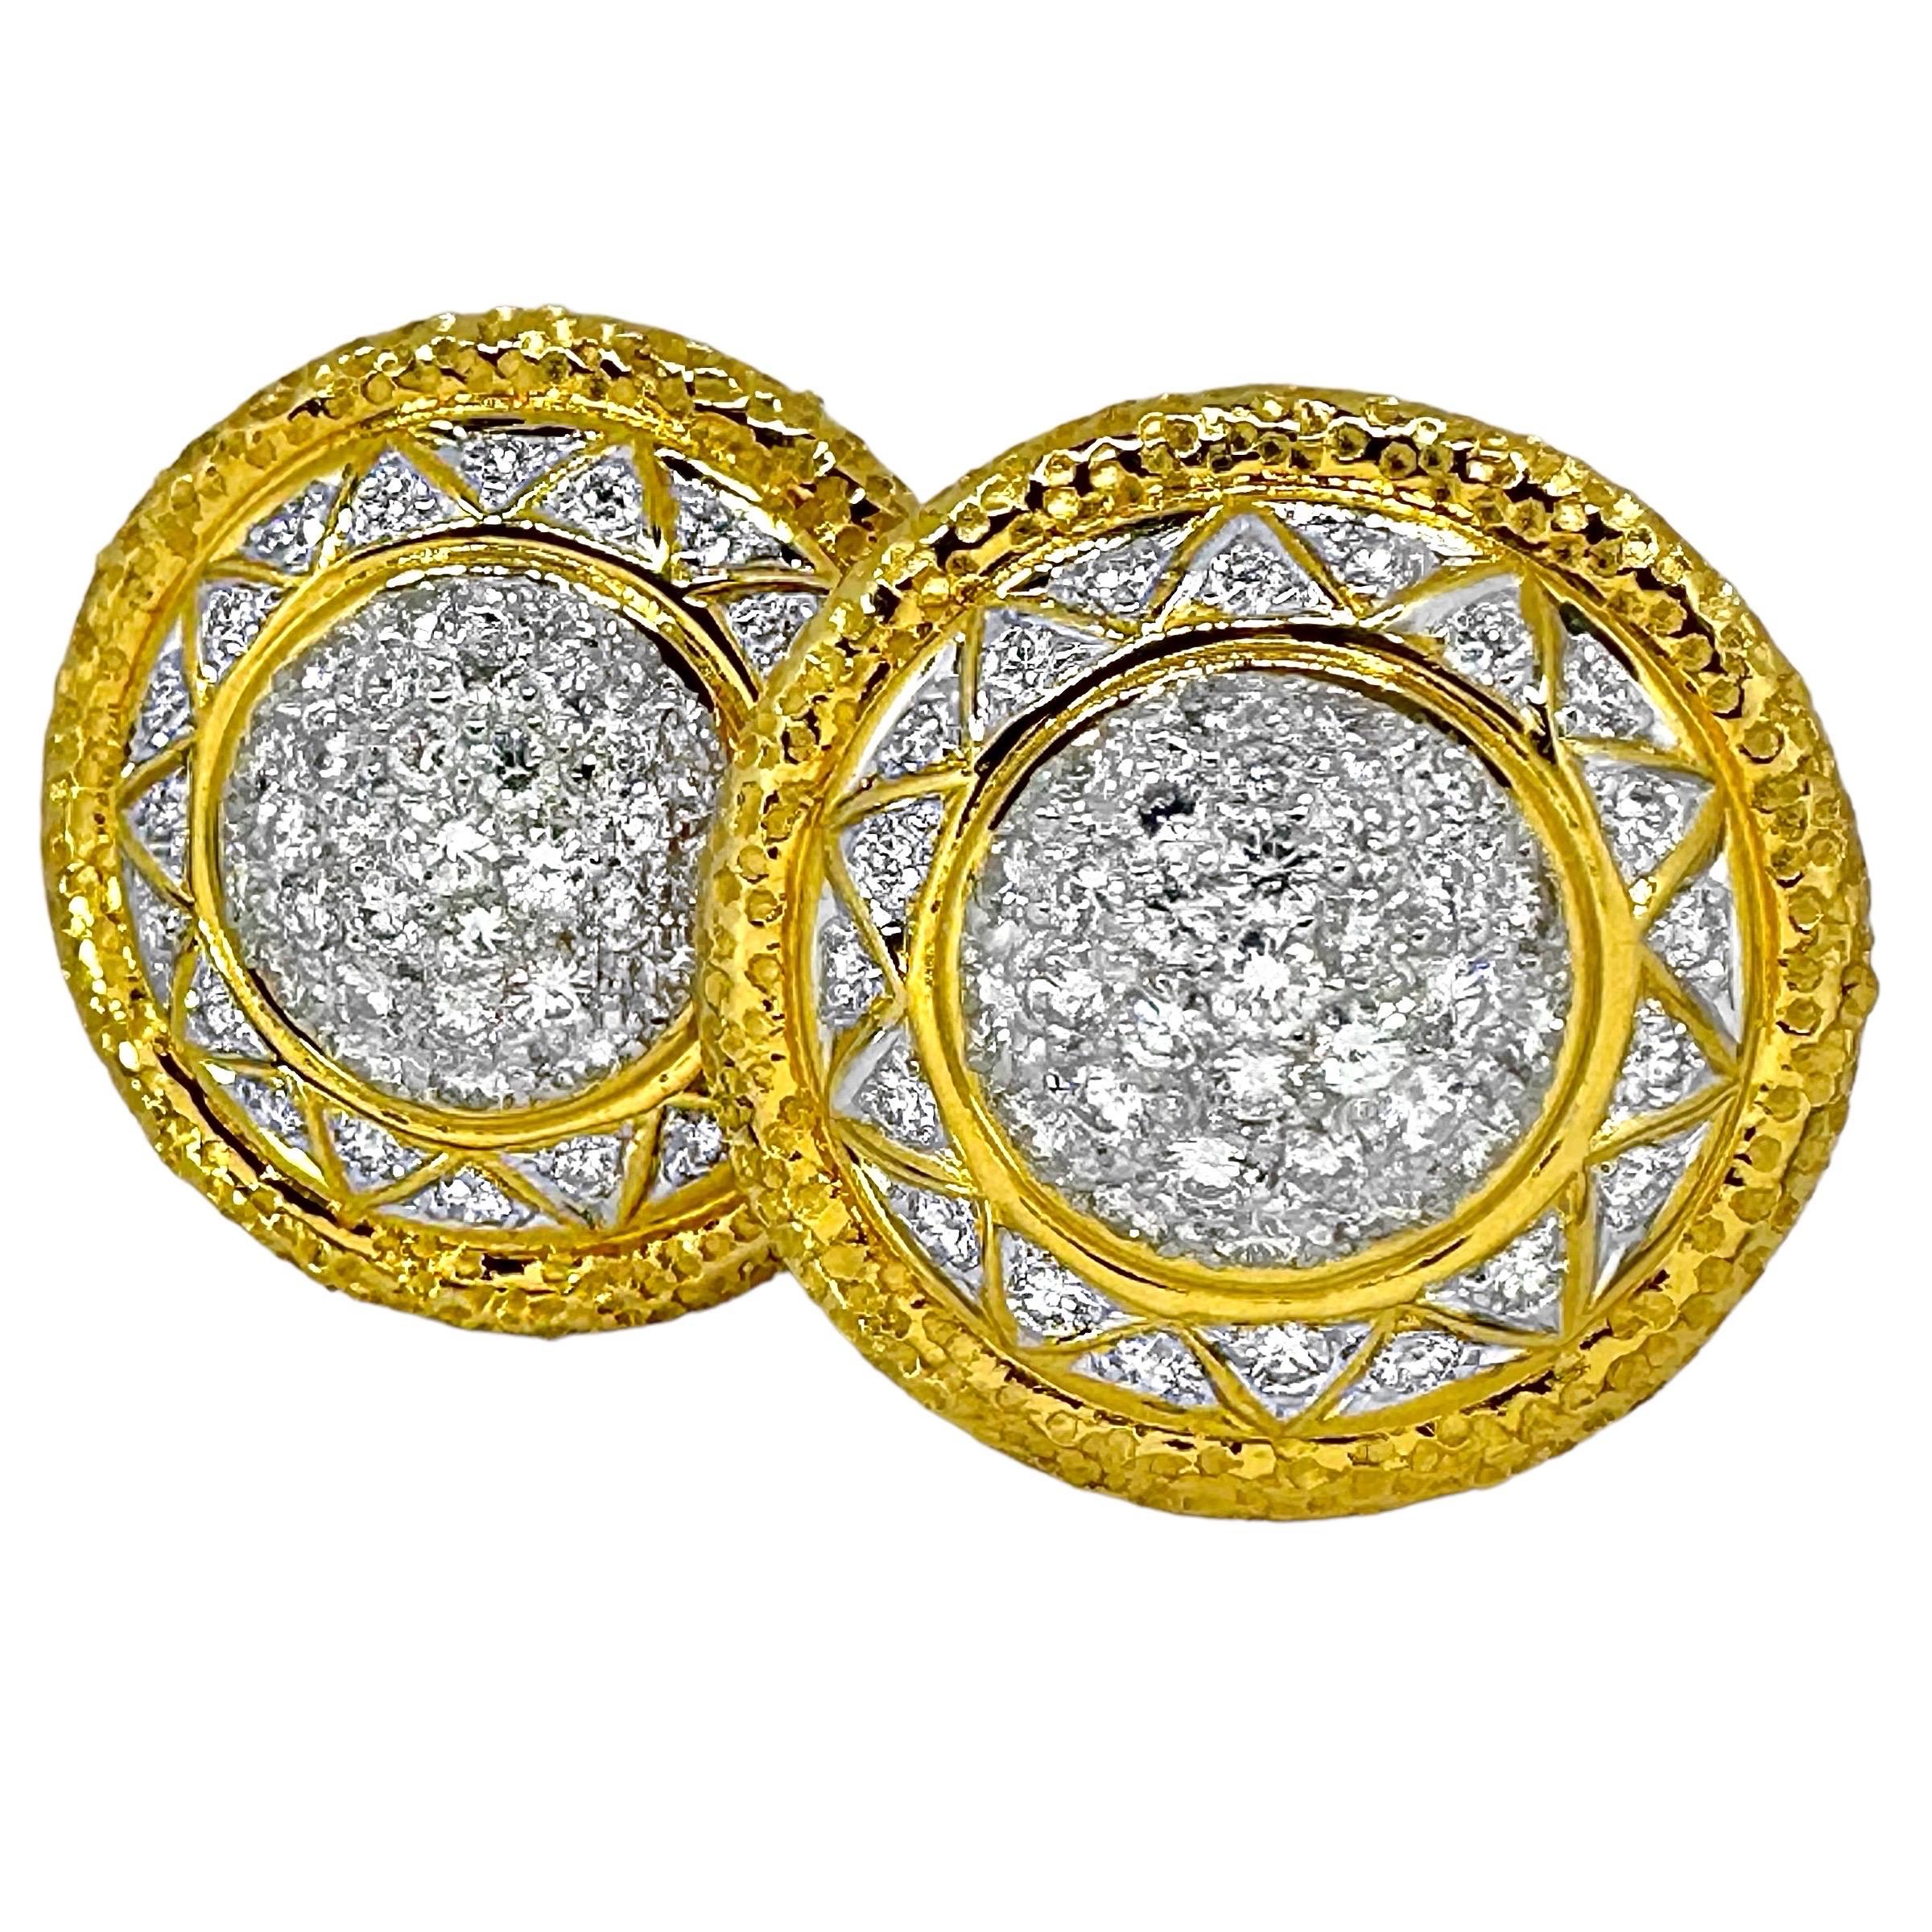 18K Stylish & Tailored Gold & Diamond Encrusted Dome Earrings 7/8 Inch Diameter For Sale